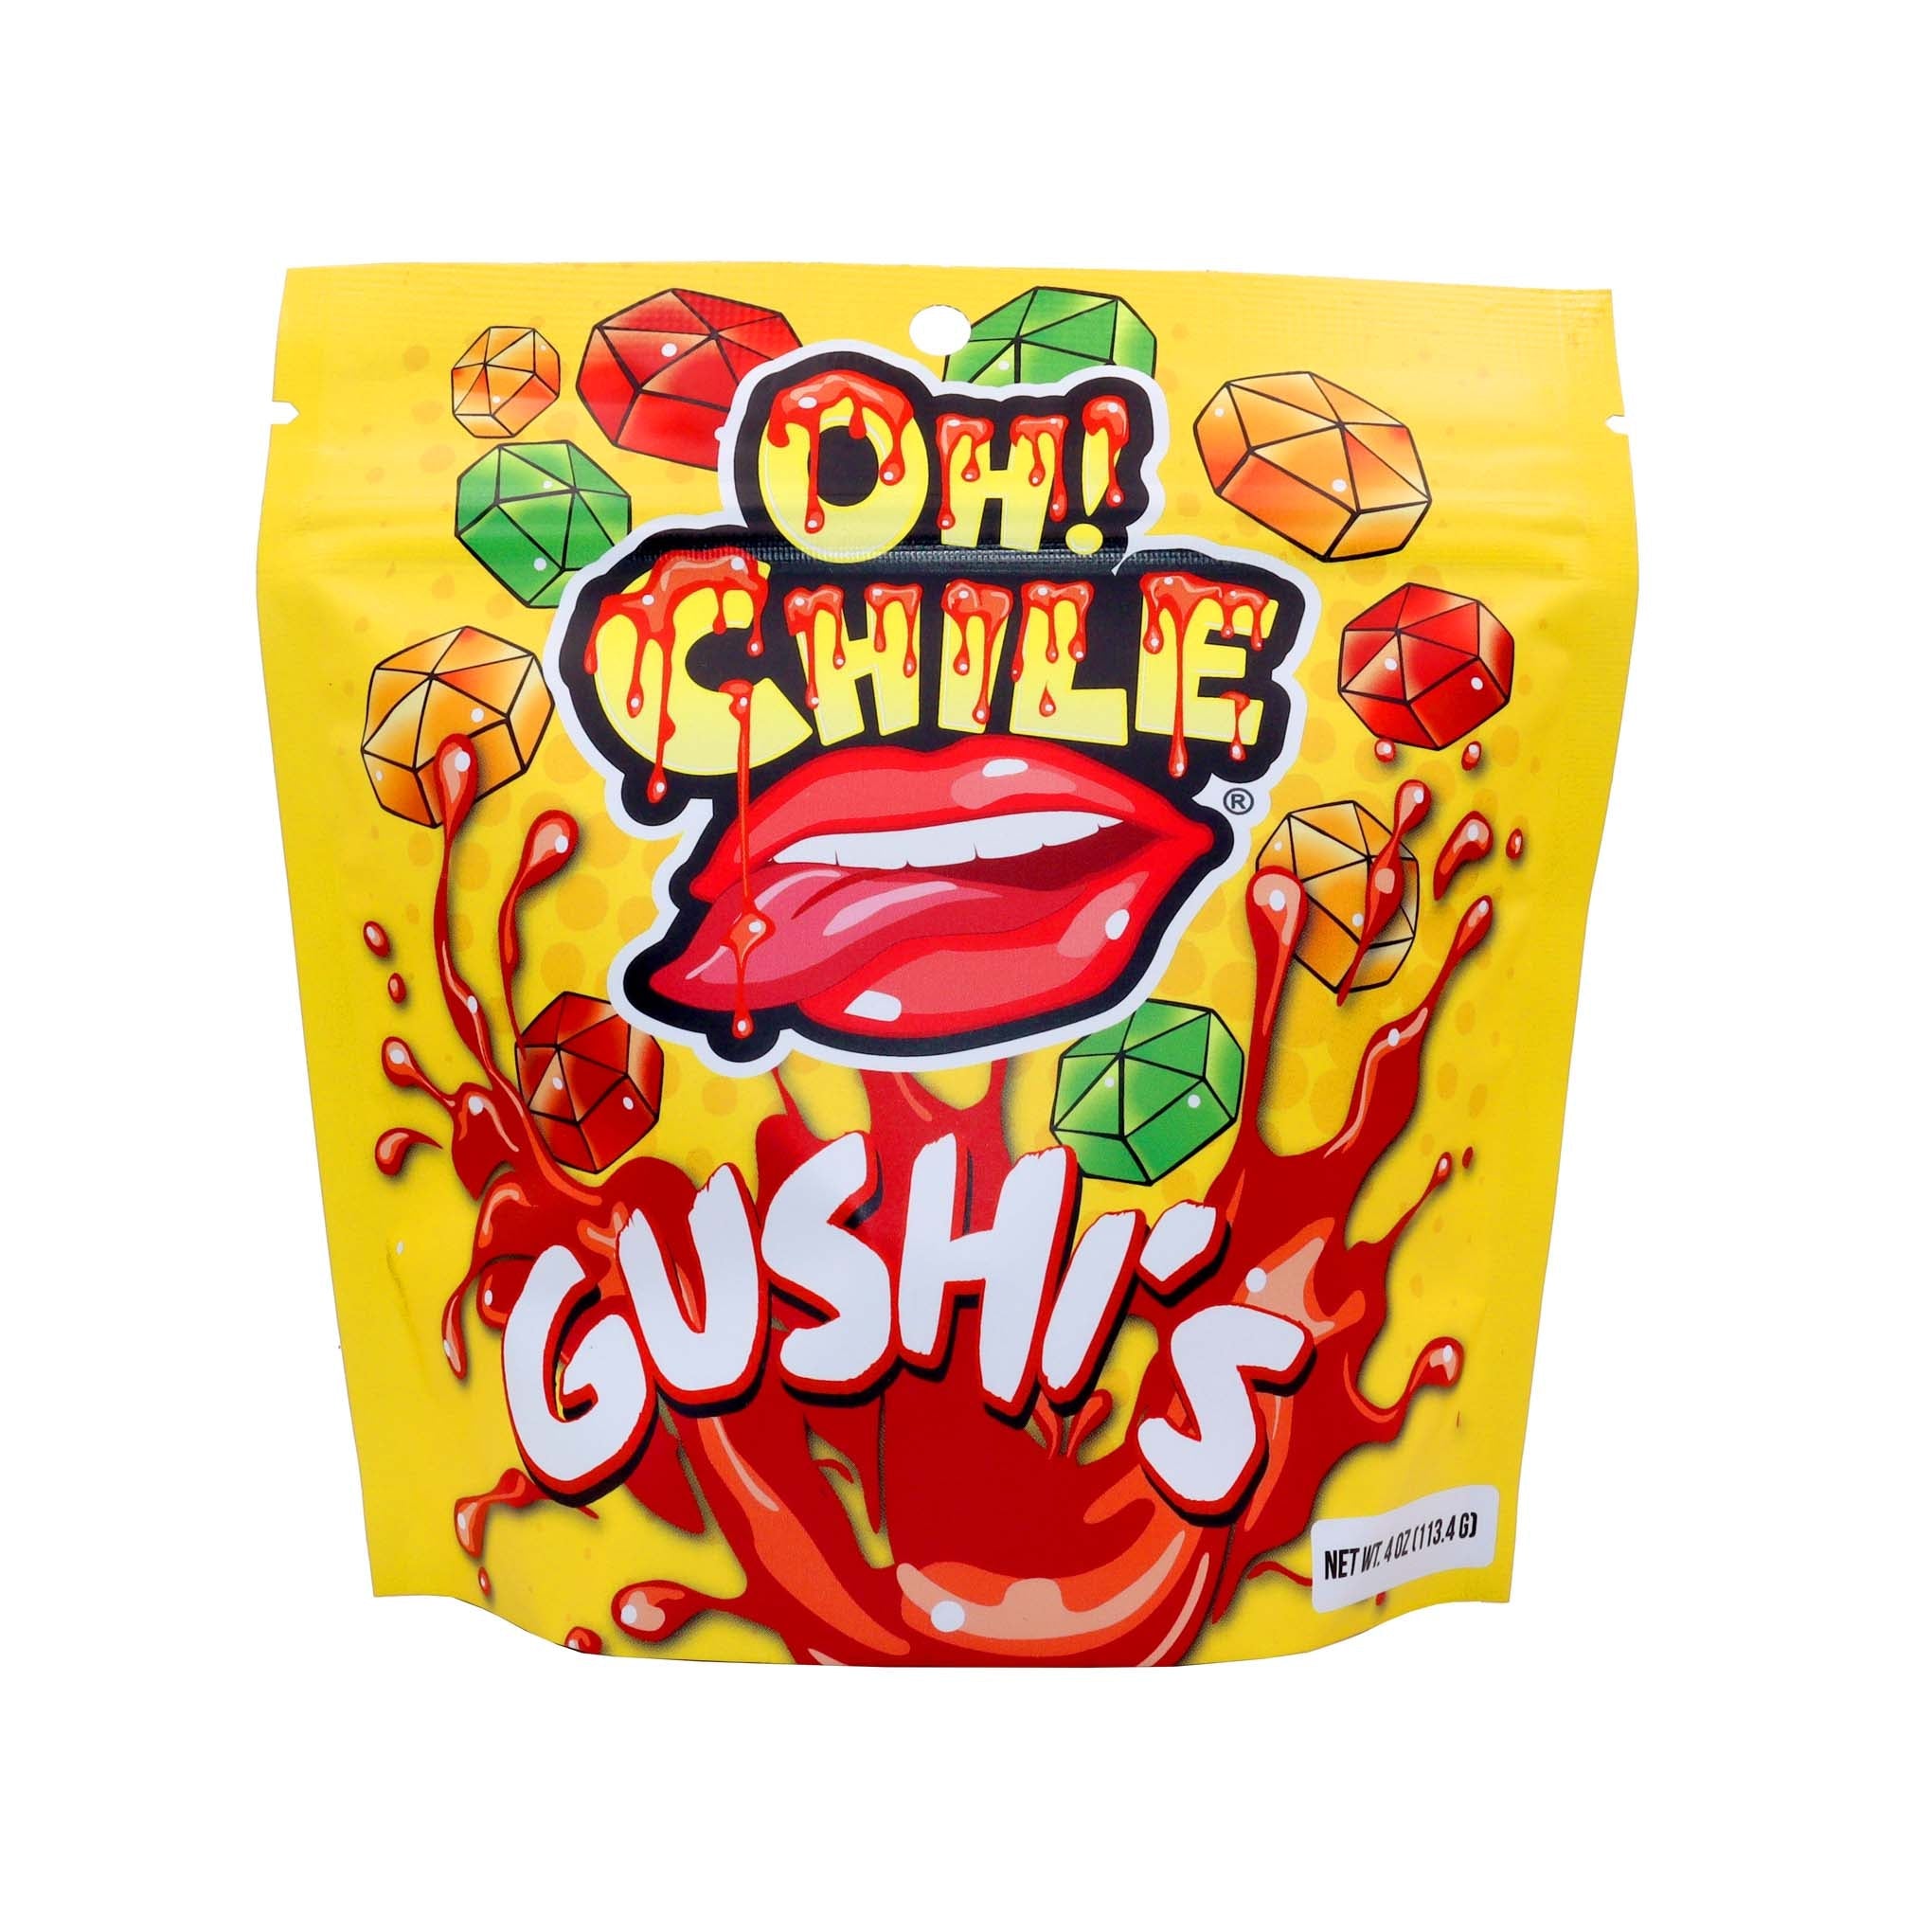 OH! CHILE GUSHI'S